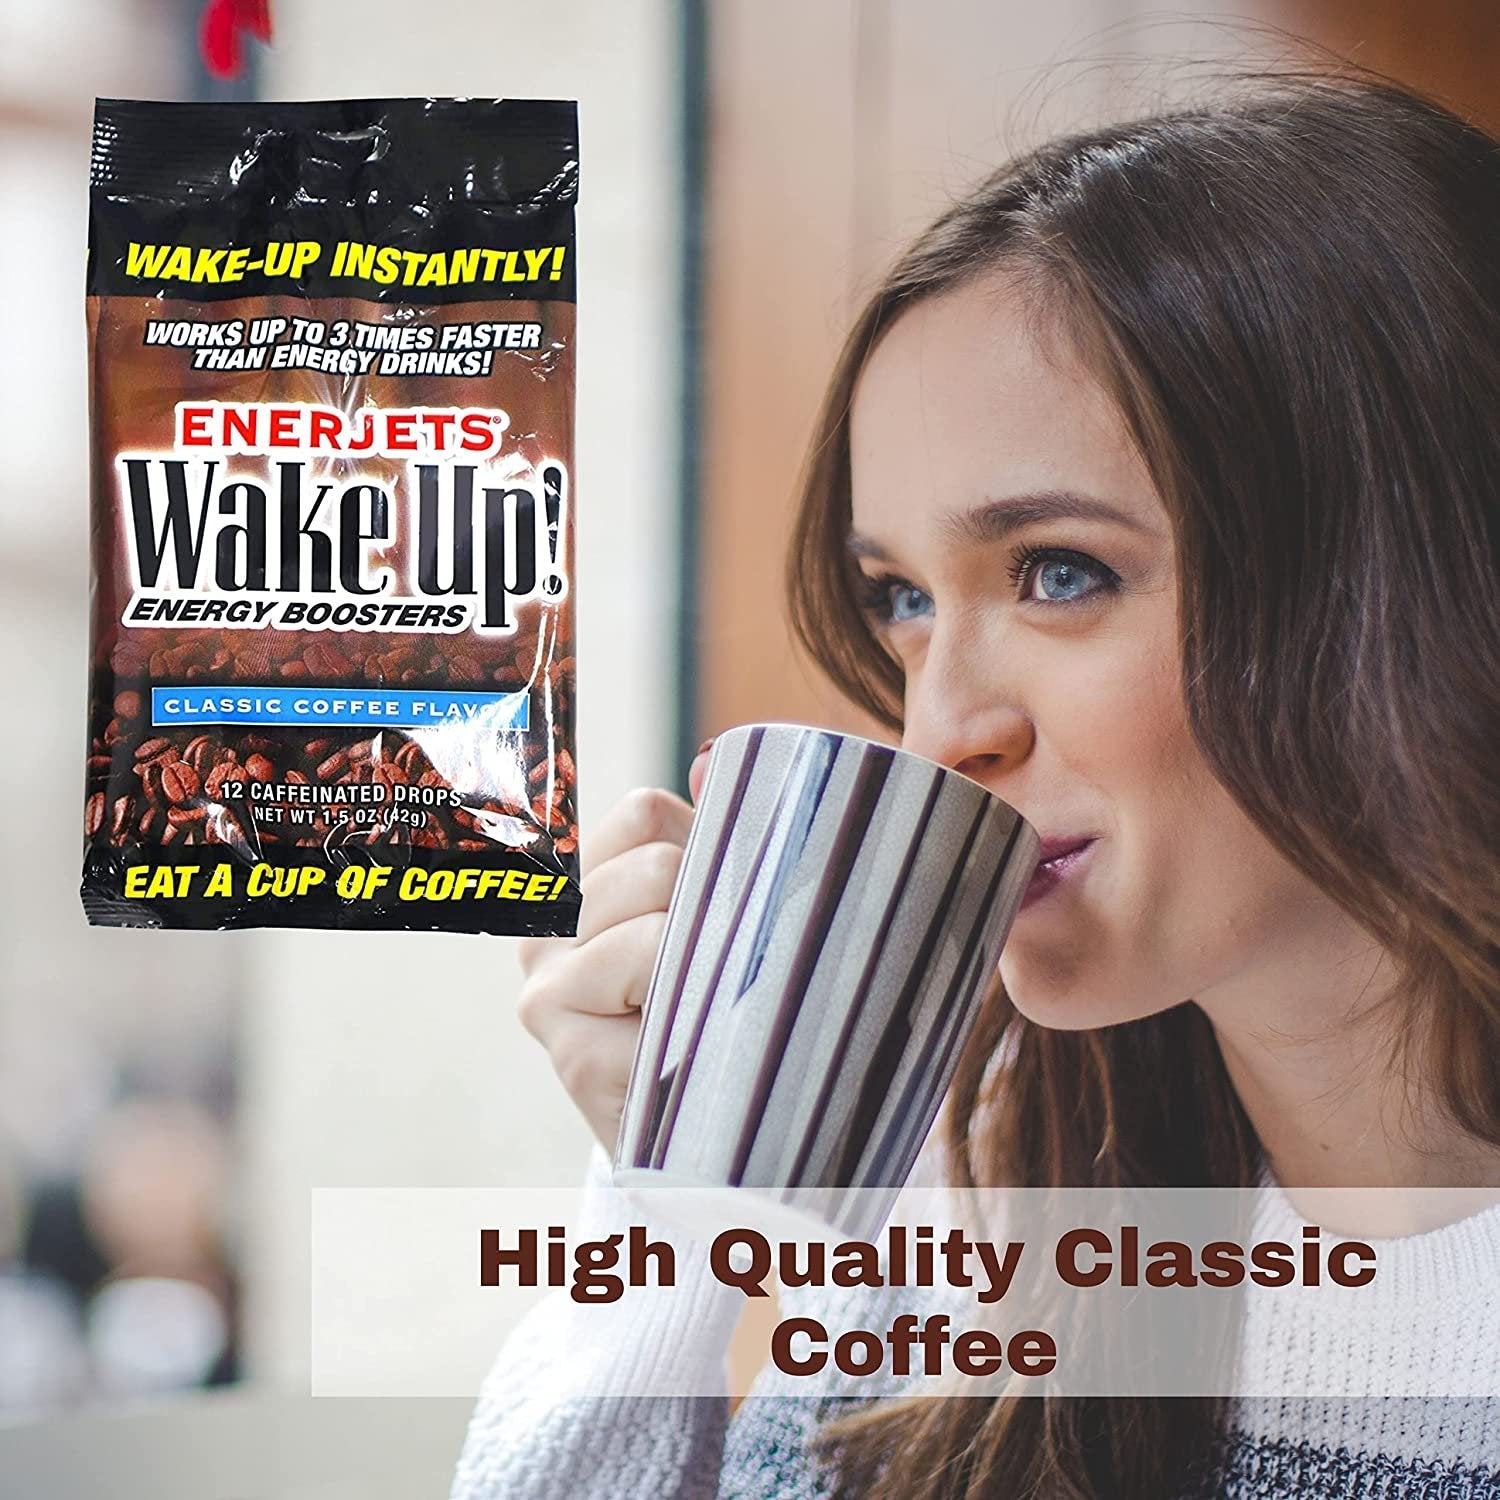 Worldwide Nutrition Enerjets Wake Up Energy Booster Caffeinated Drops - Instant Coffee Energy Supplements Classic Flavor Pack of 6, 12 Drops Per Package with Worldwide Multi Purpose Key Chain